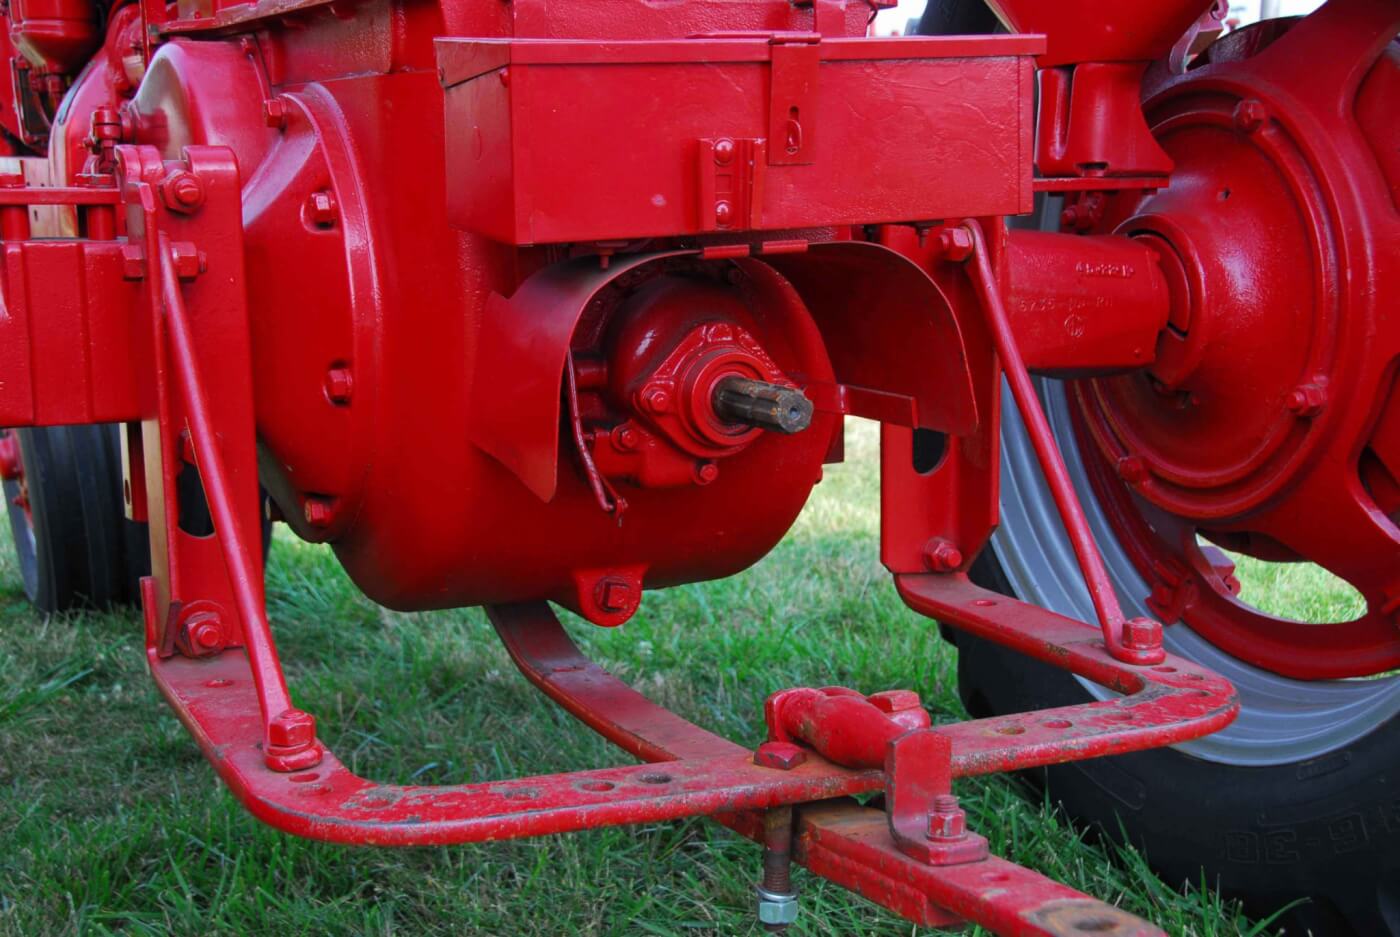 The working end of the MD shows the swinging drawbar and the non-live PTO.